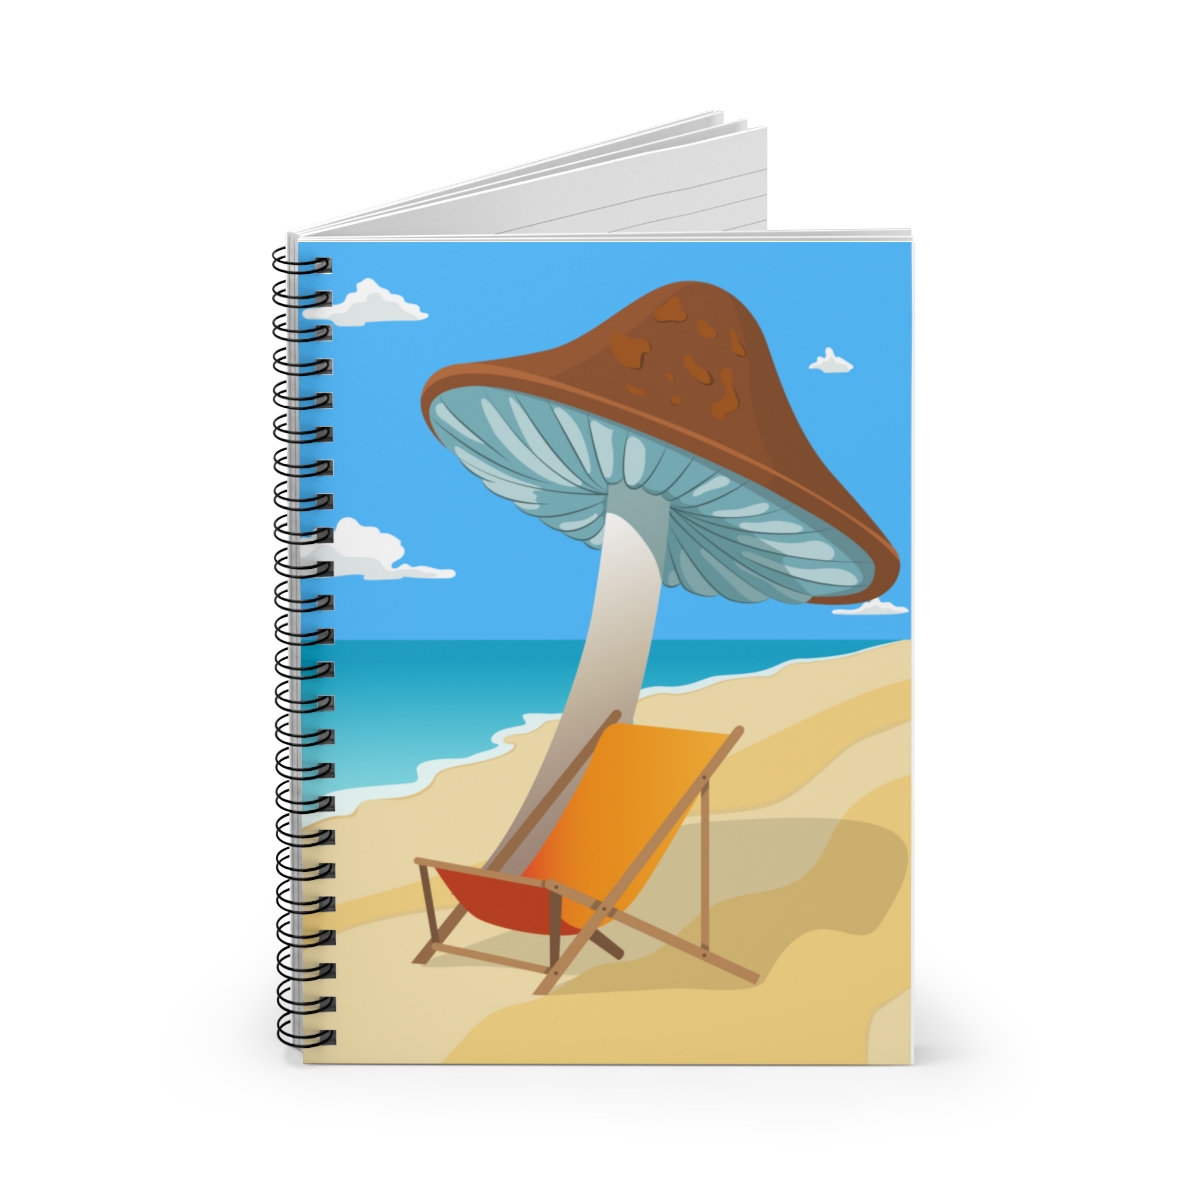 Spiral Notebook - Ruled Line product thumbnail image